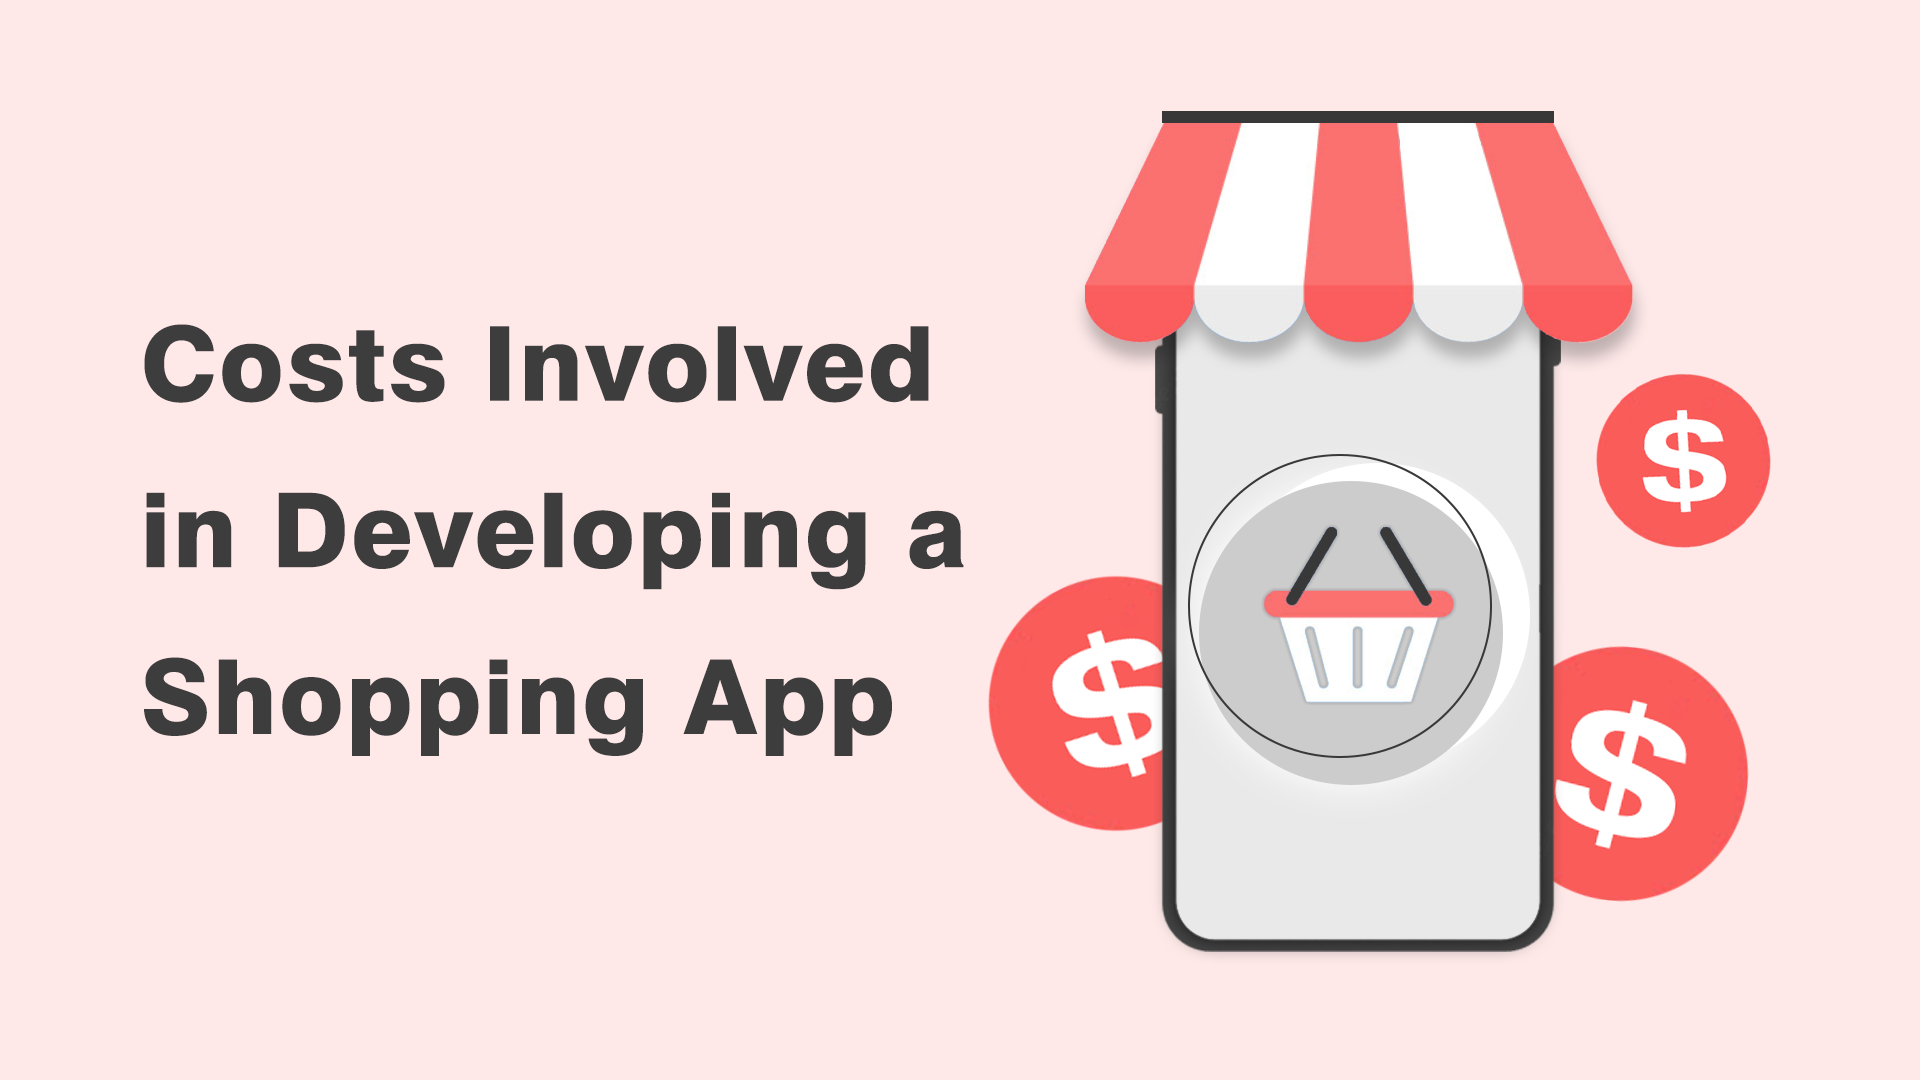 Costs Involved in Developing a Shopping App